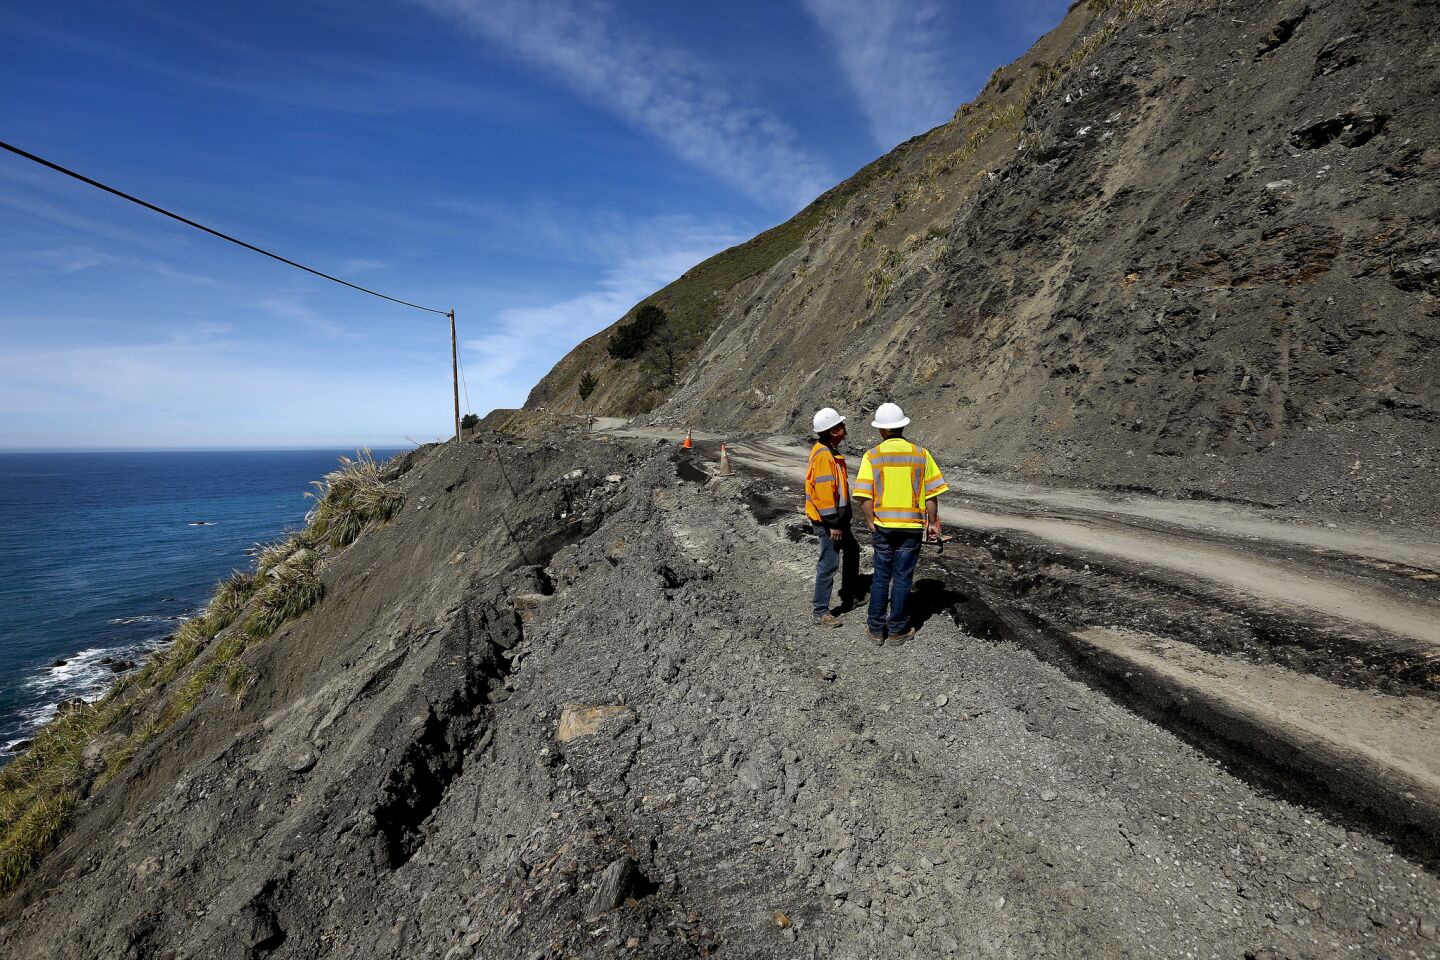 Caltrans inspector Tony Pascual, left, and construction engineer Wayne Walker examine a landslide that took out the southbound lane and shoulder on Highway One, in a section known as Mud Creek along the Big Sur coast.